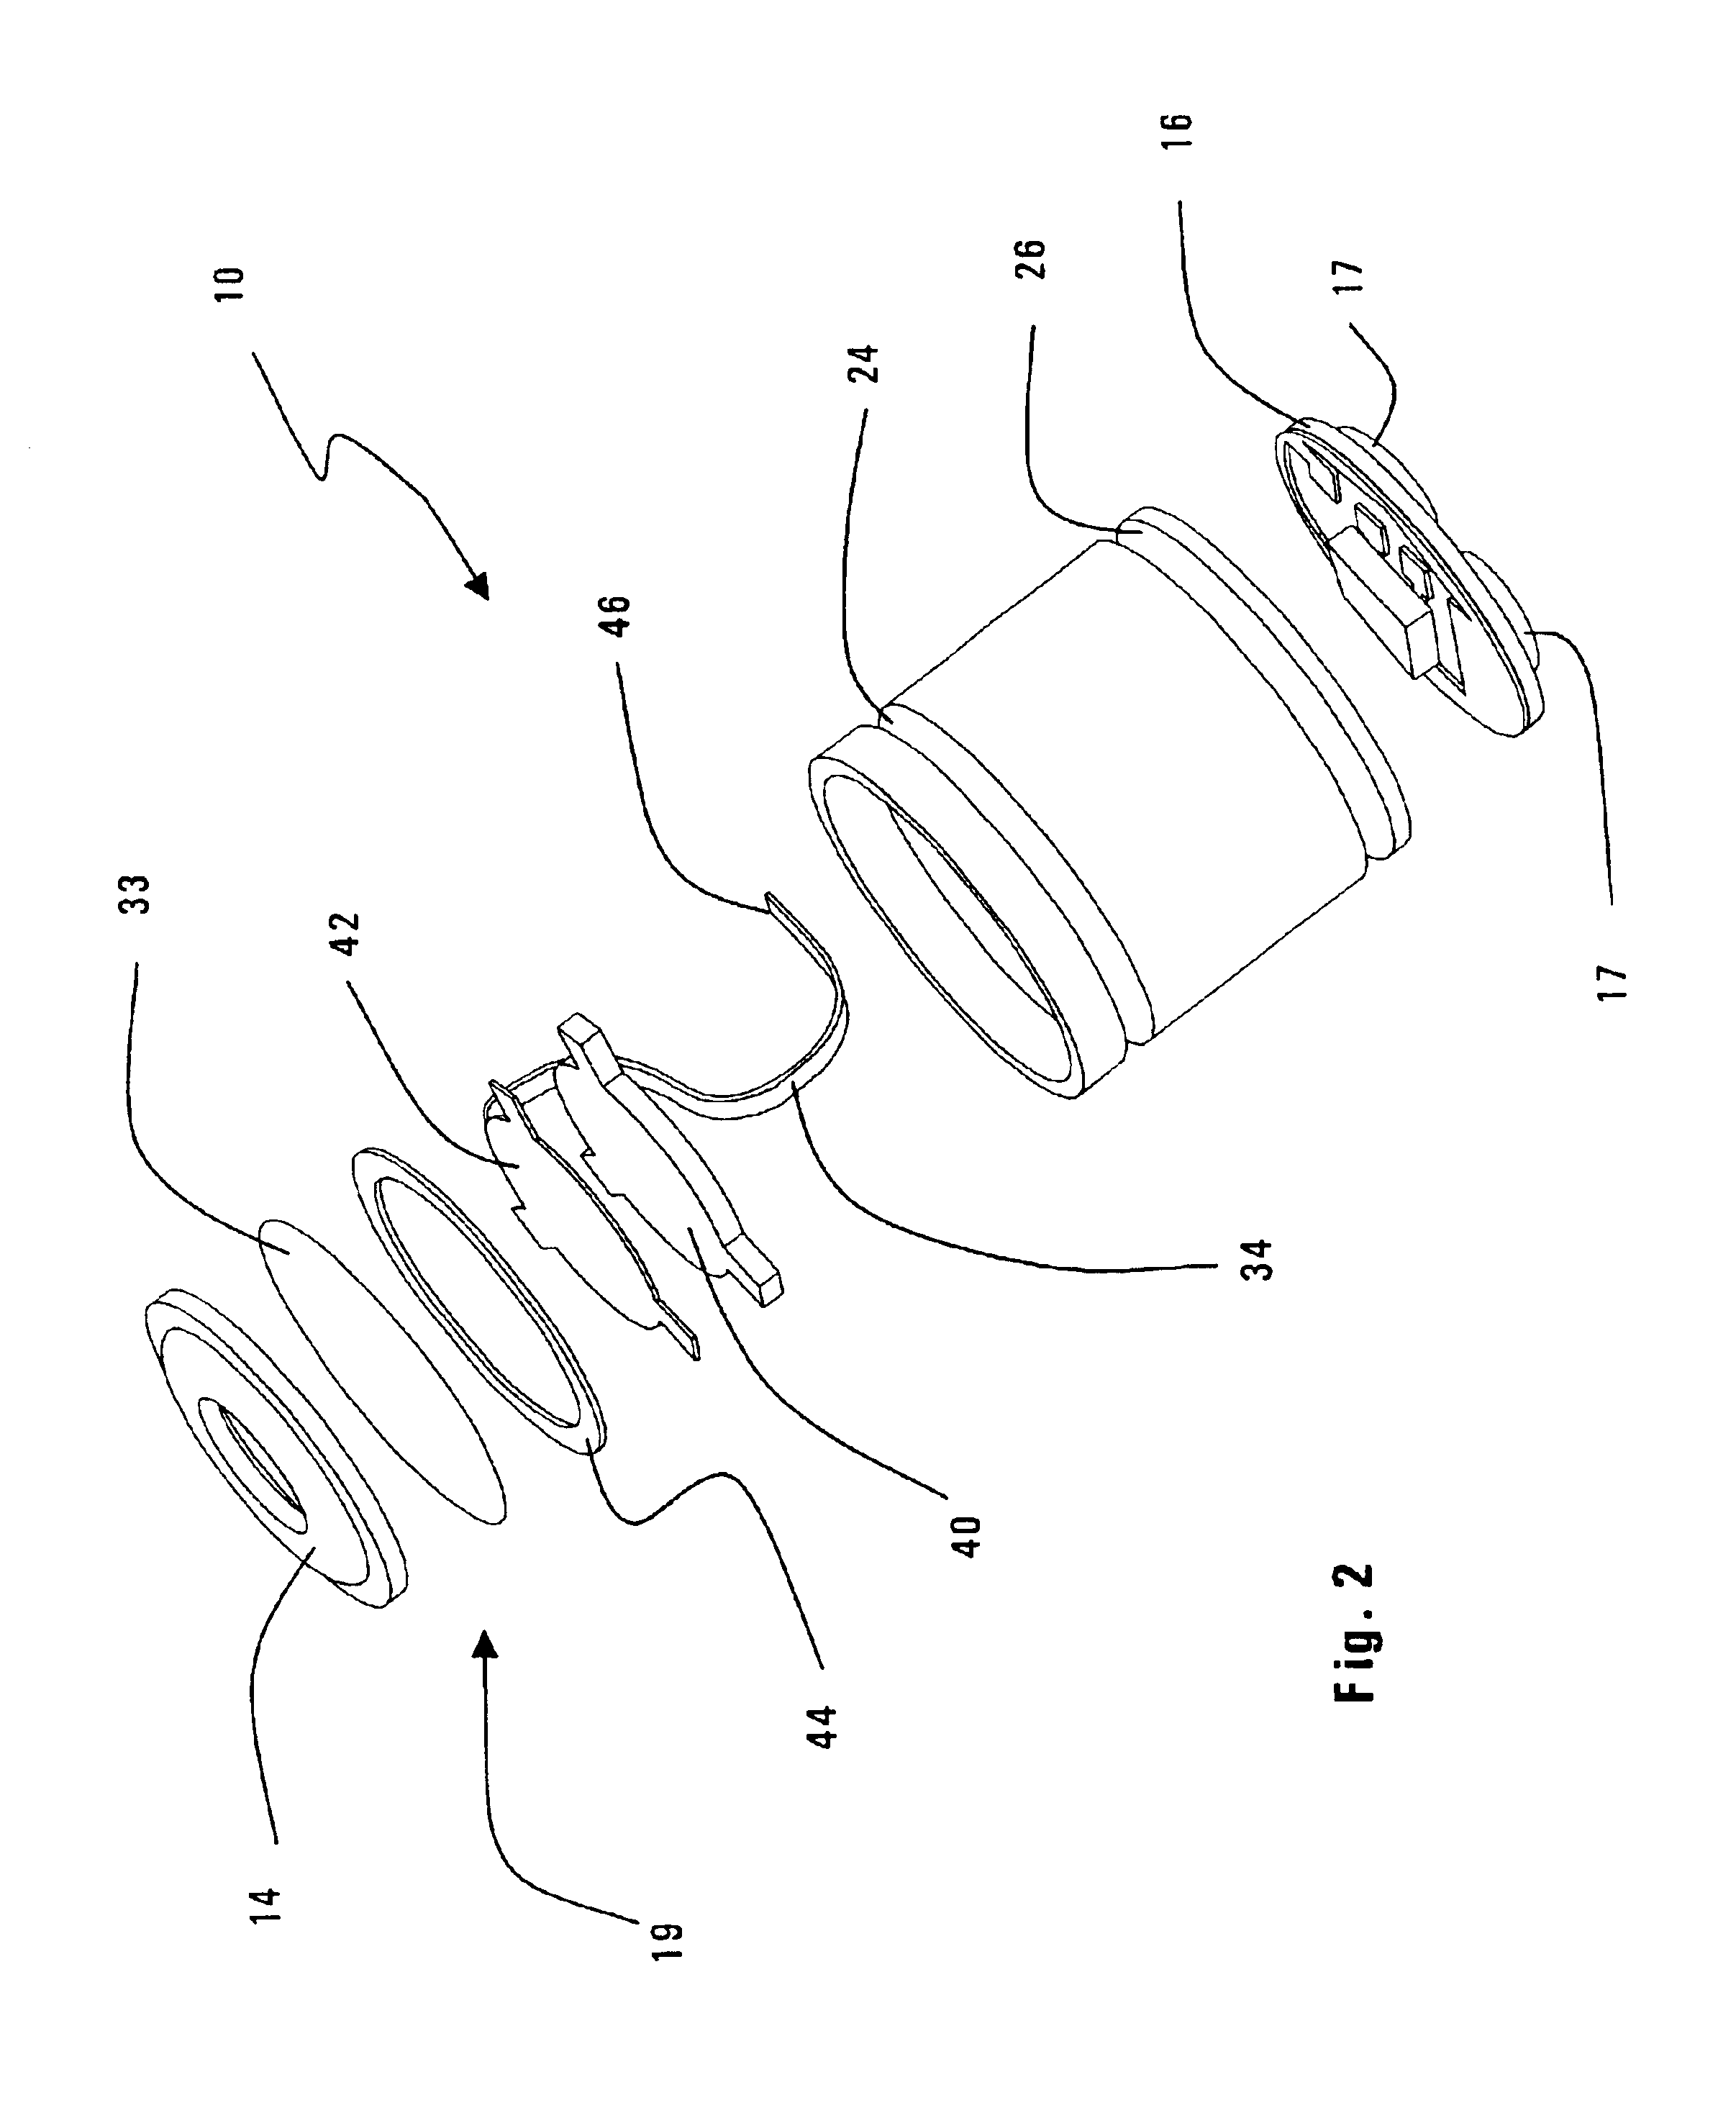 Microphone for a listening device having a reduced humidity coefficient